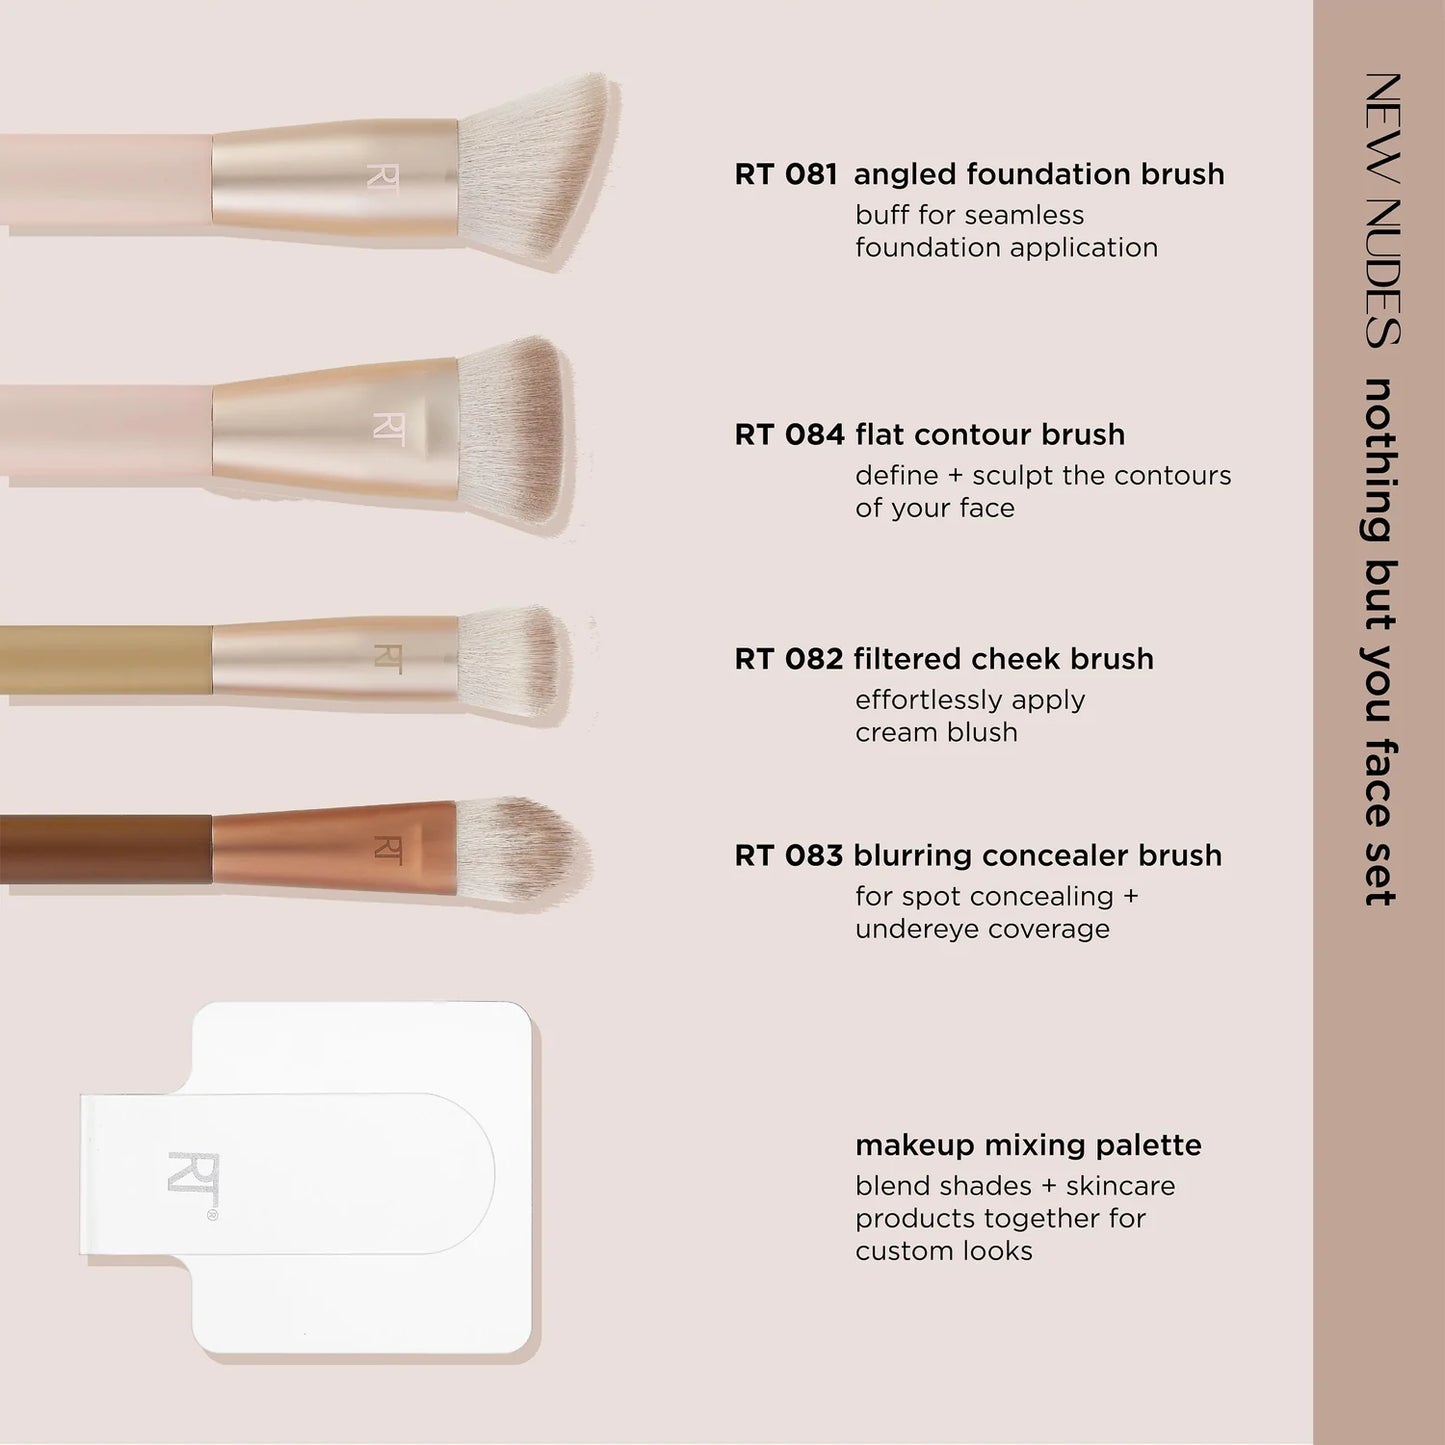 Real Techniques New Nudes Nothing But You Face Kit